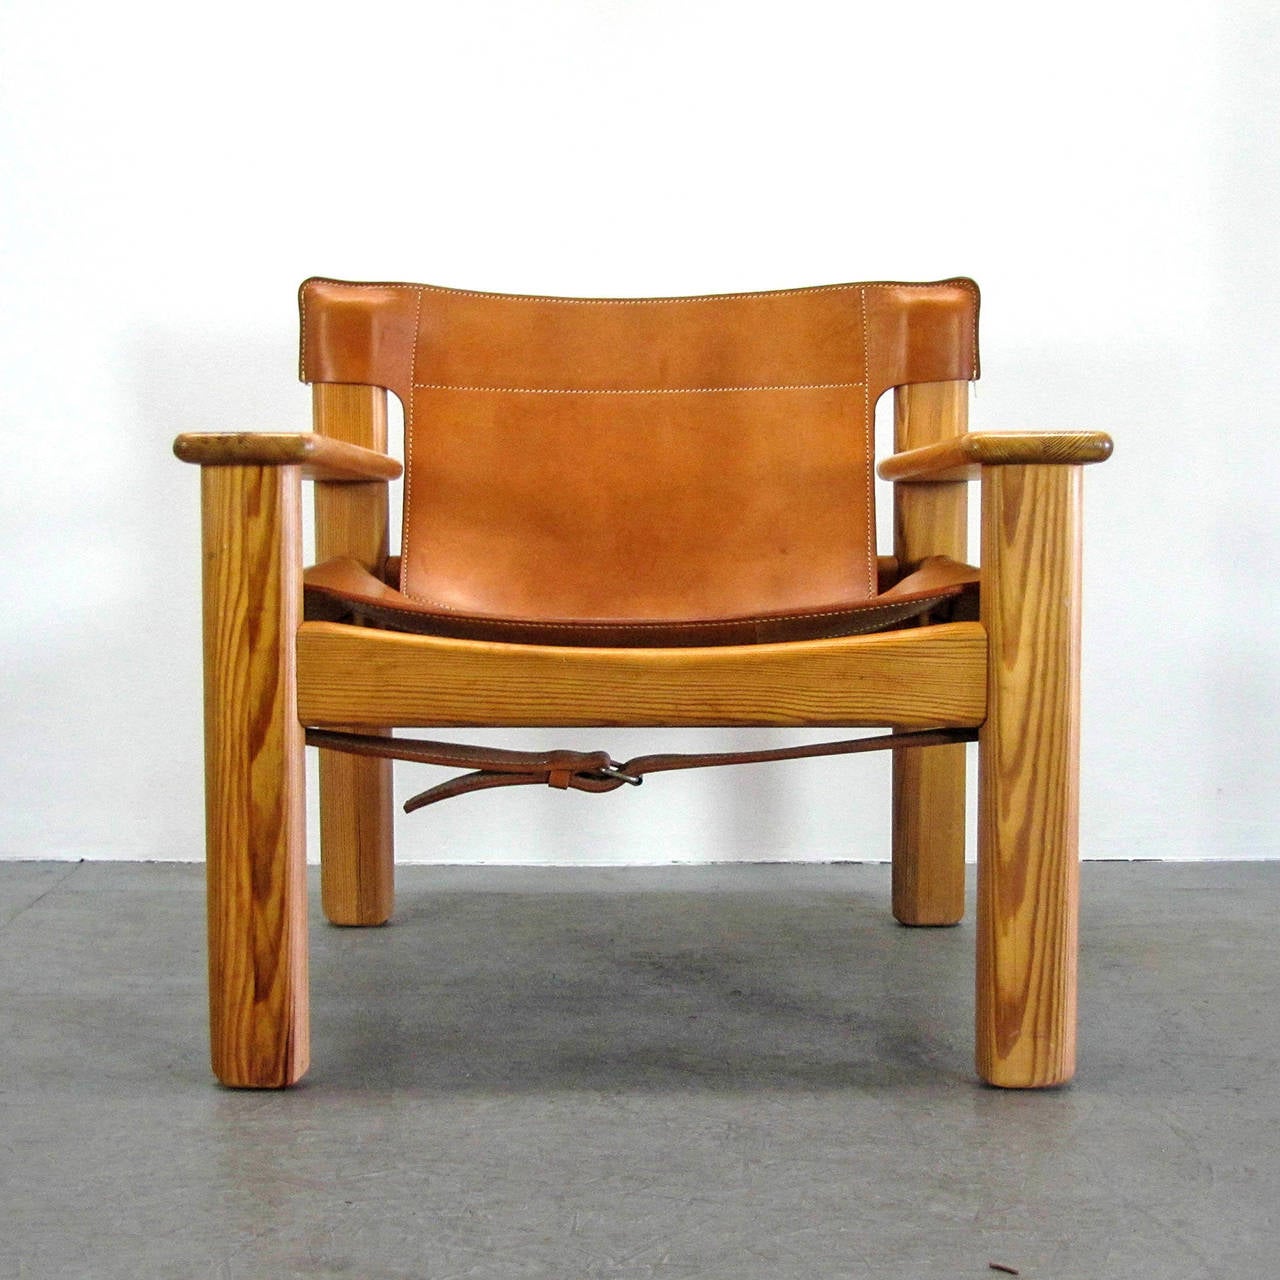 Bold and comfortable pair of Danish modern lounge chairs, by Bernt Petersen, Denmark, 1970, oversized pine frames with thick cognac colored leather with incredible patina.